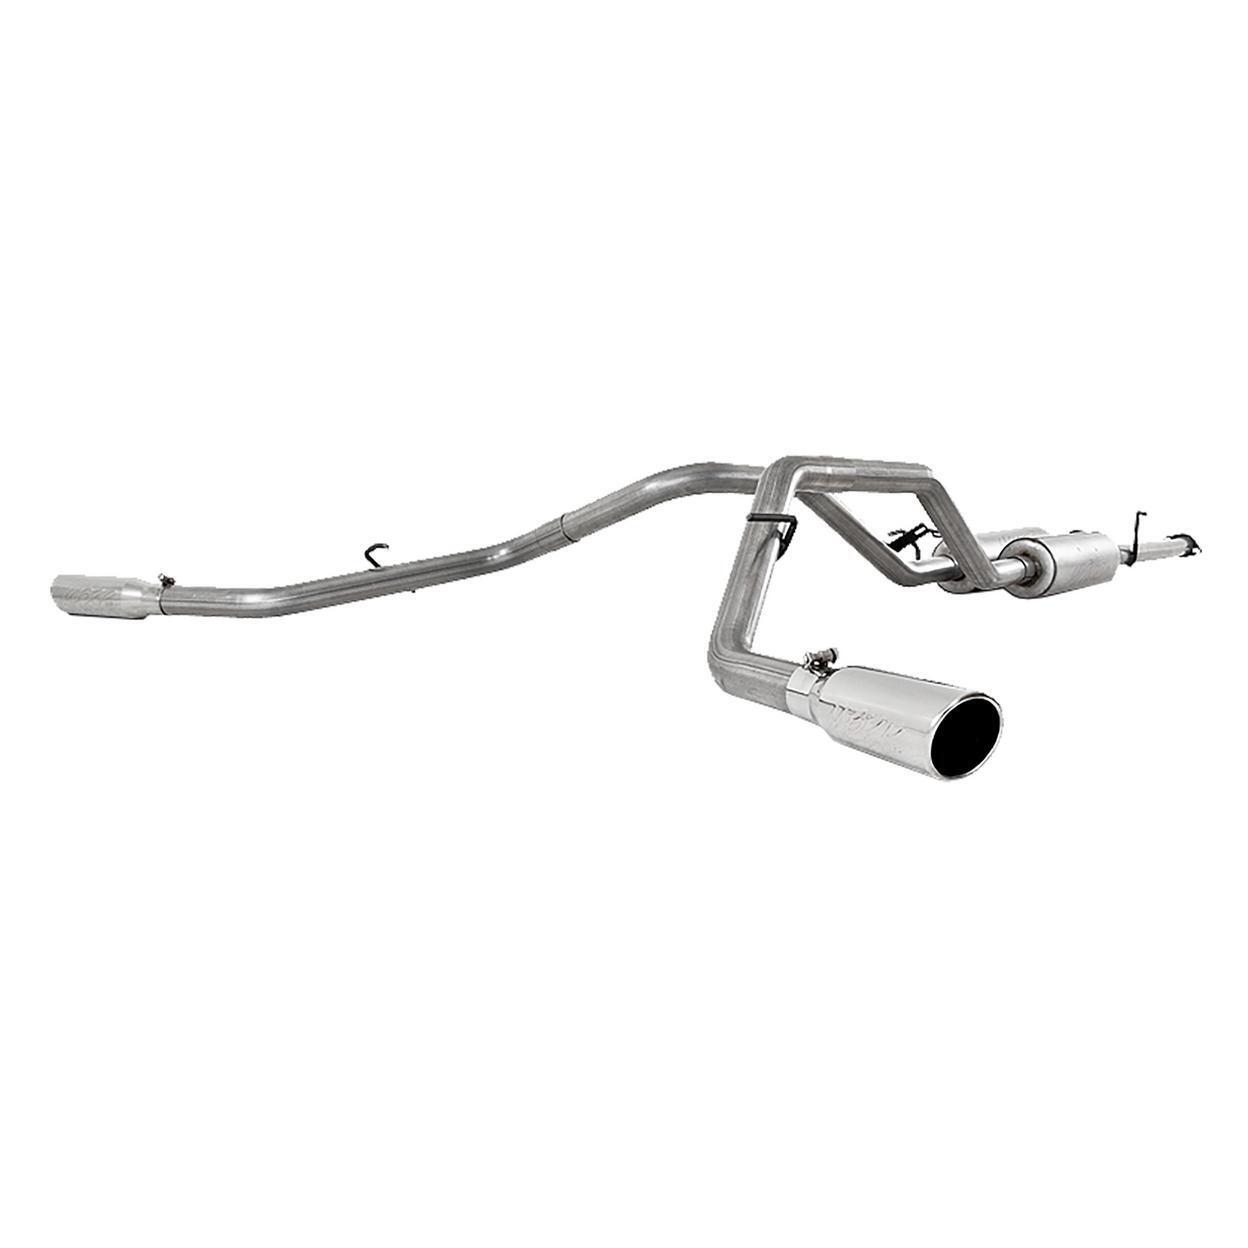 MBRP S5316409-IM Exhaust System Kit Fits 2021 Toyota Tundra TRD Off-Road